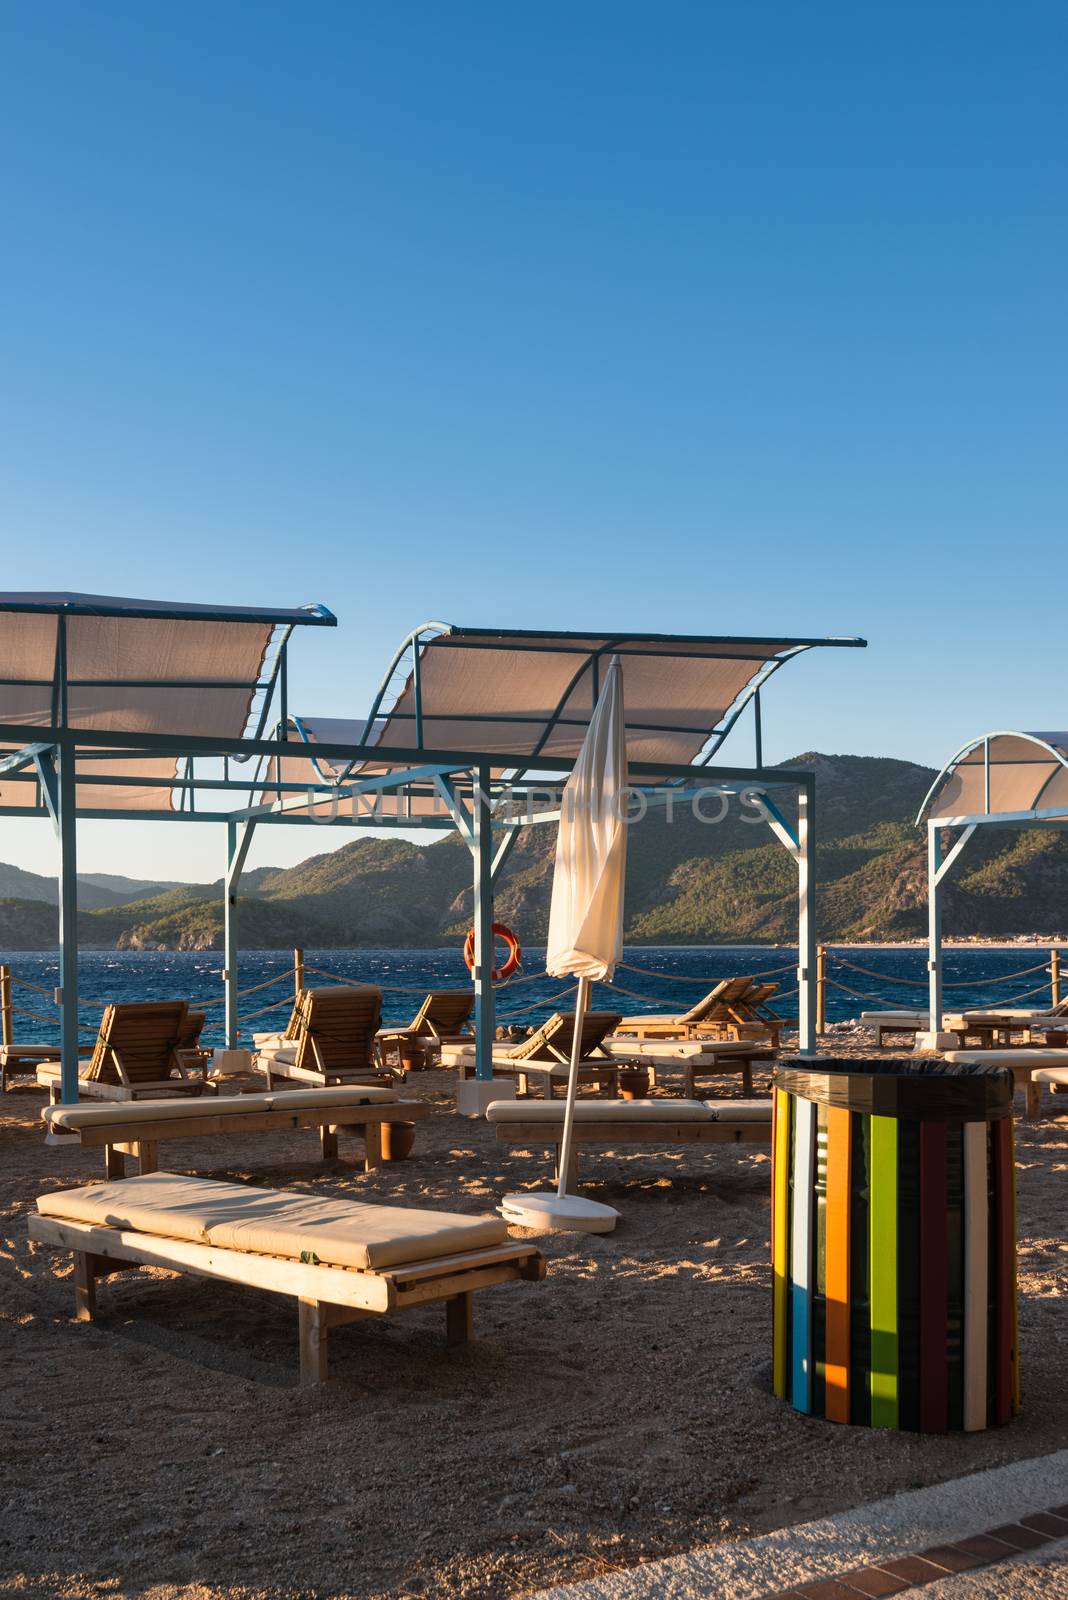 Sun loungers with umbrellas and colorful garbage can on the beach